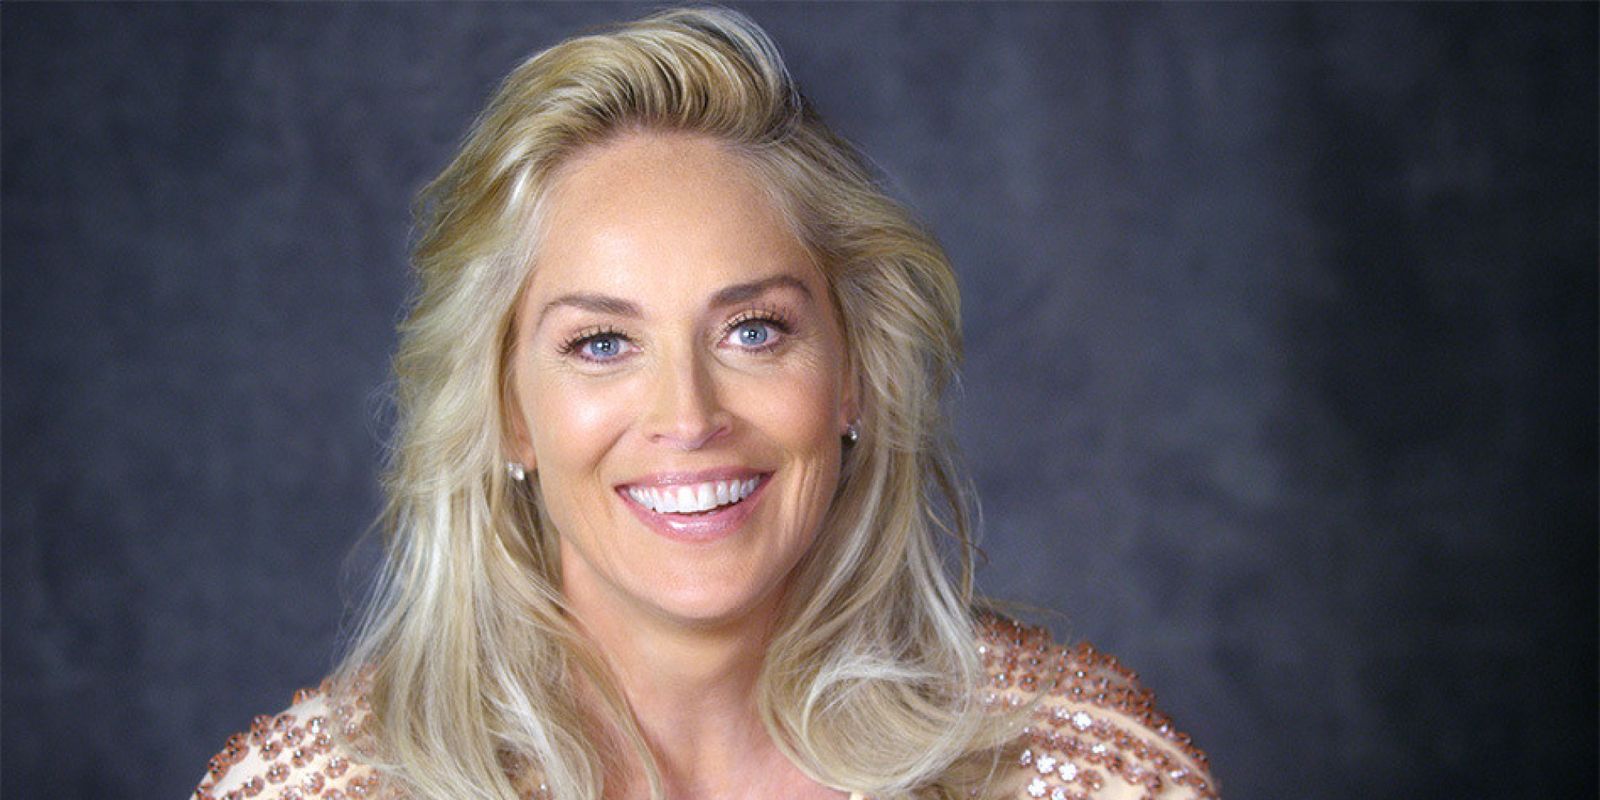 Sharon Stone Shares Her Opinion On Gender And Wage Gap